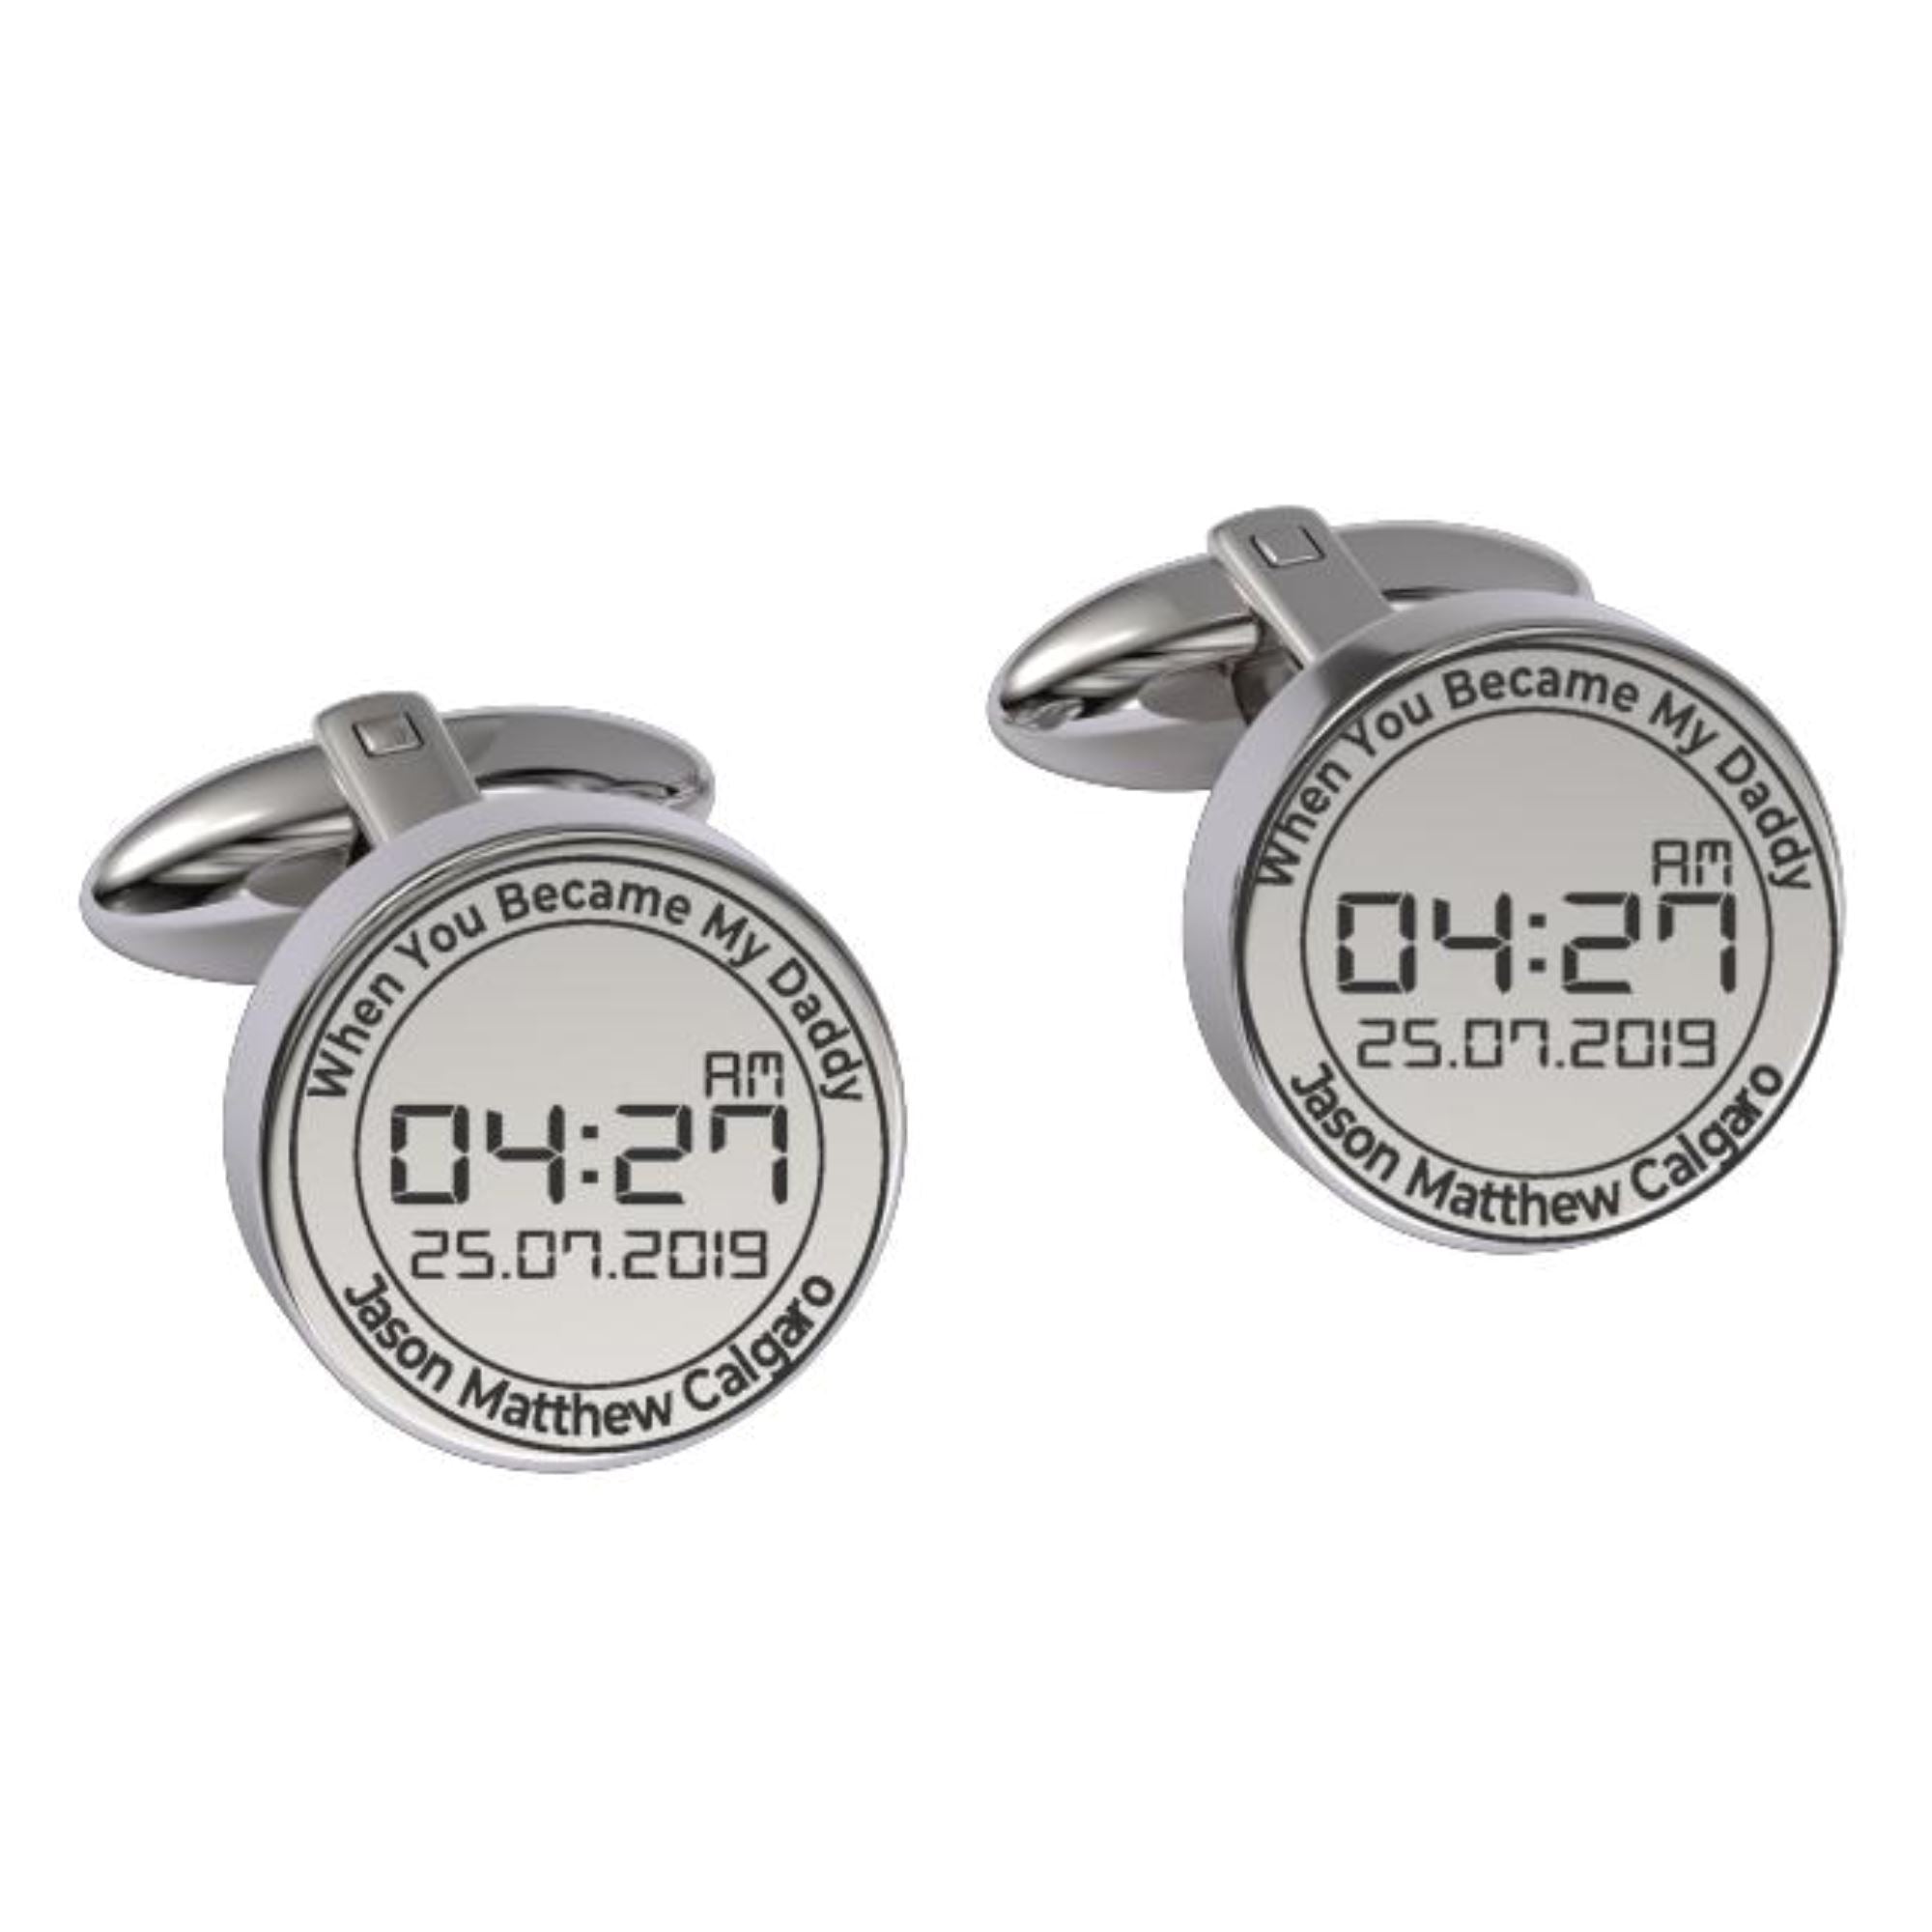 When You Became My Daddy Engraved Cufflinks Engraving Cufflinks Clinks Australia 